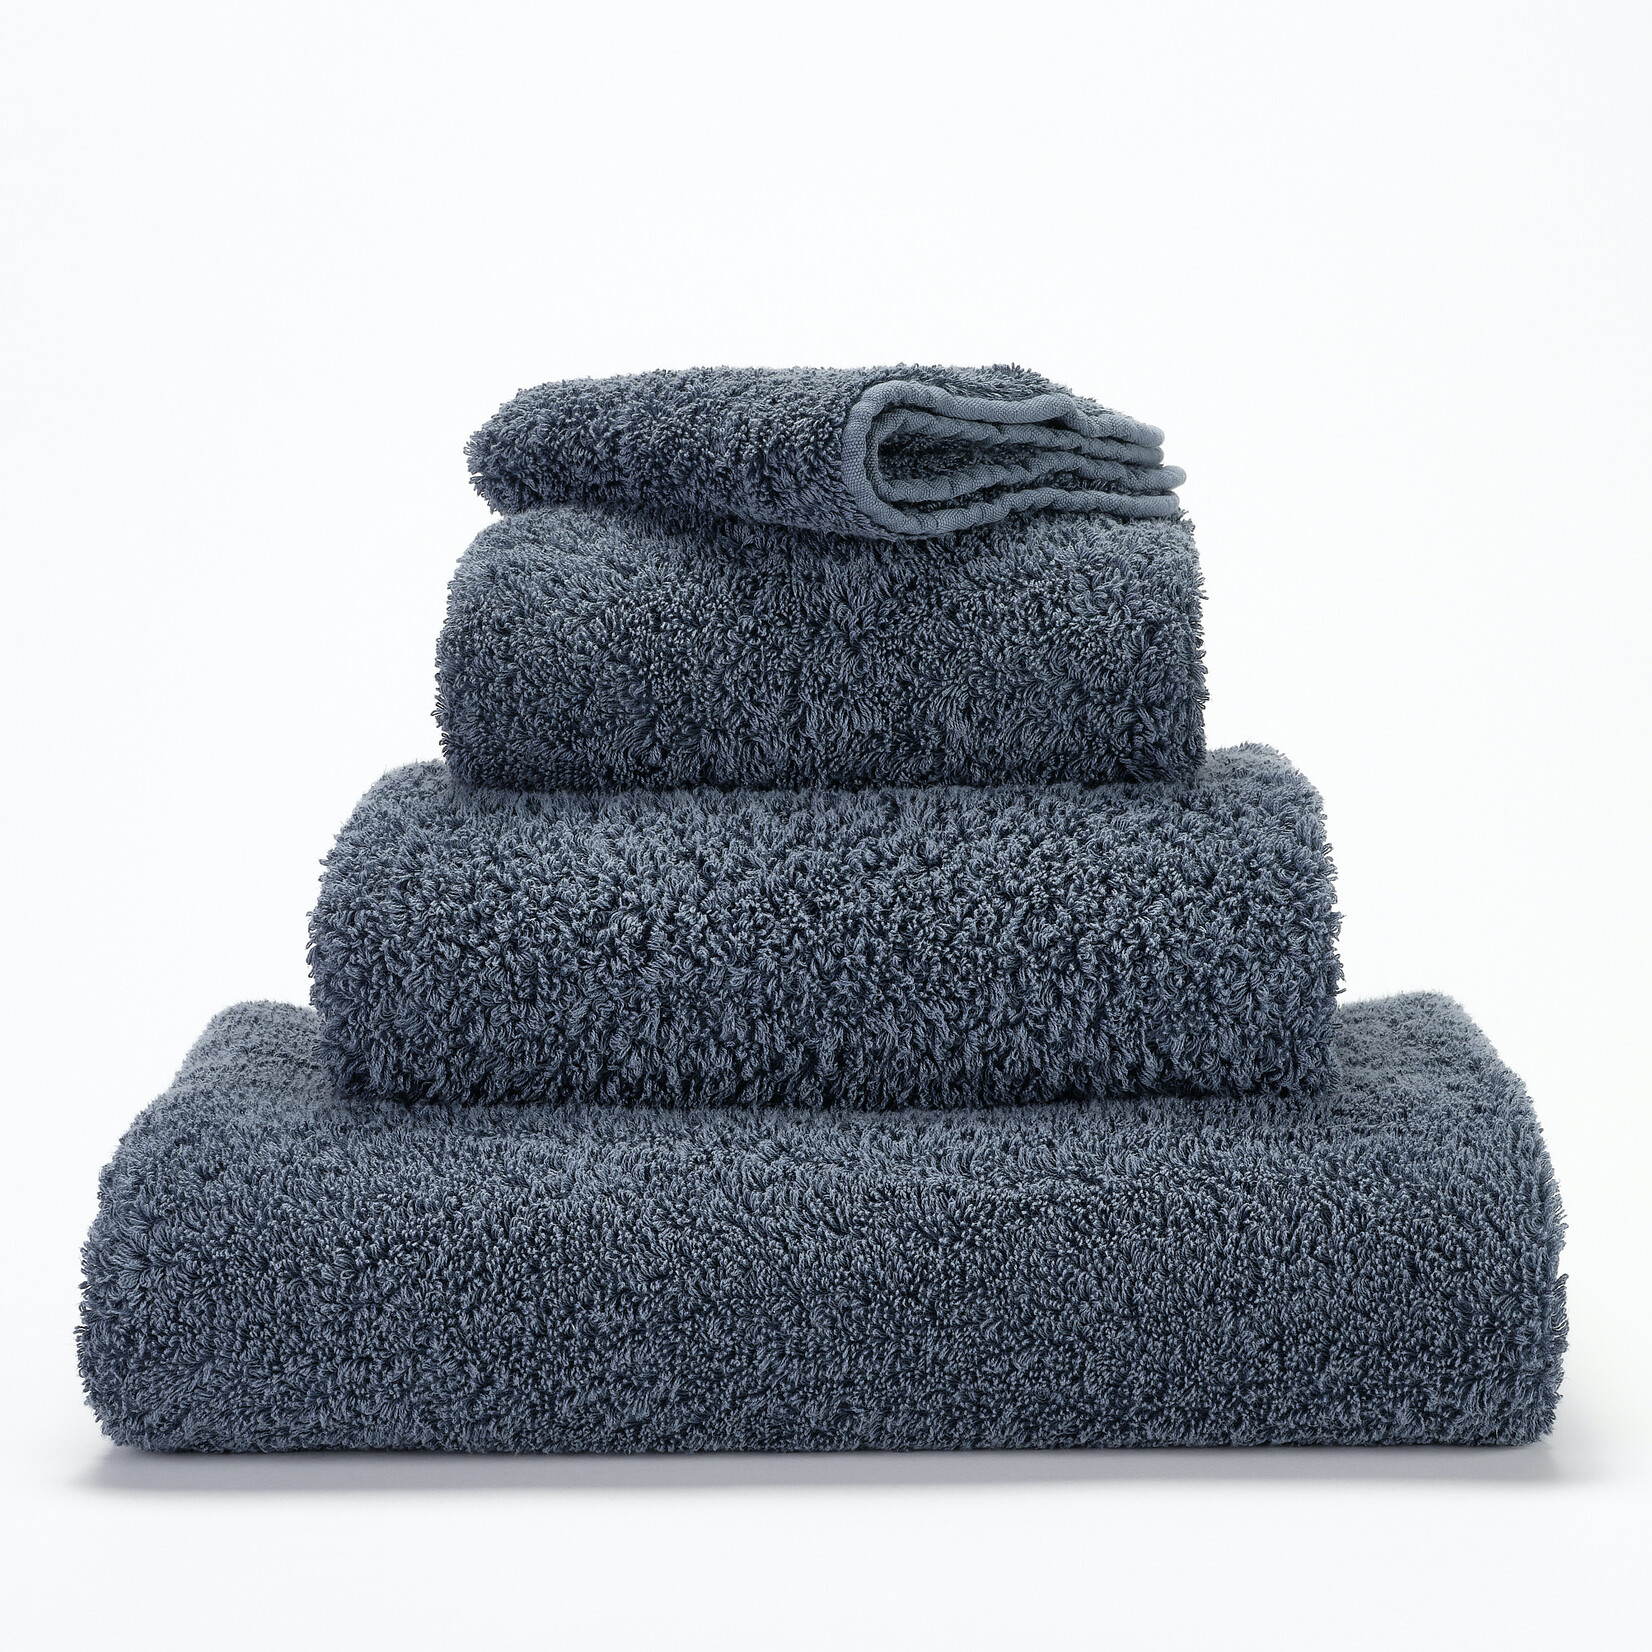 Abyss Abyss Super Pile Towels 307 Denim